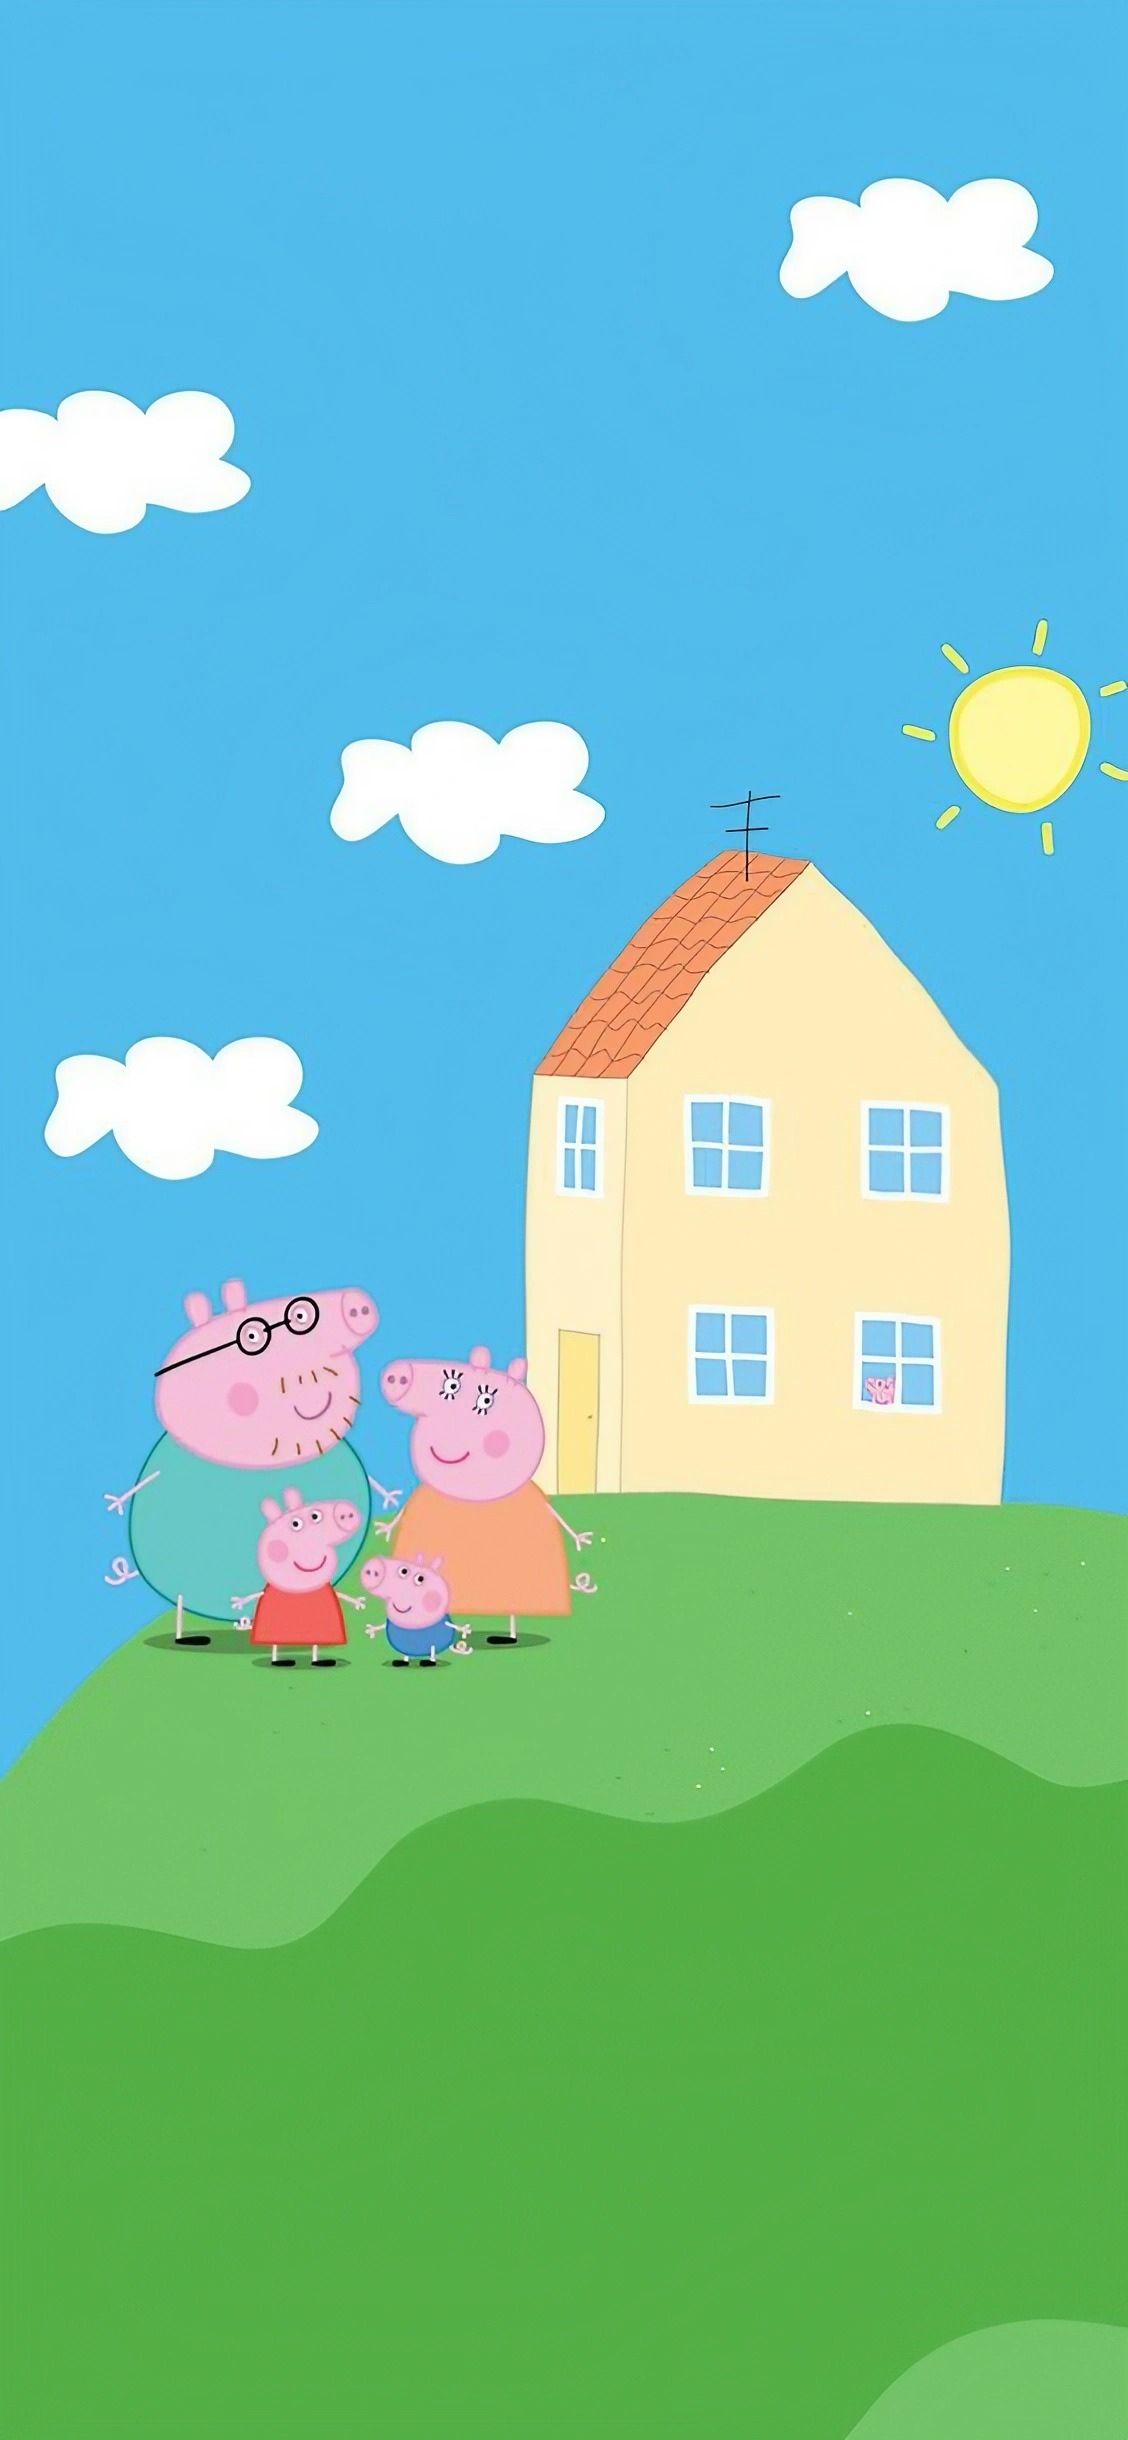 Peppa Pig wallpaper for iPhone. Download it free on our website. - Peppa Pig